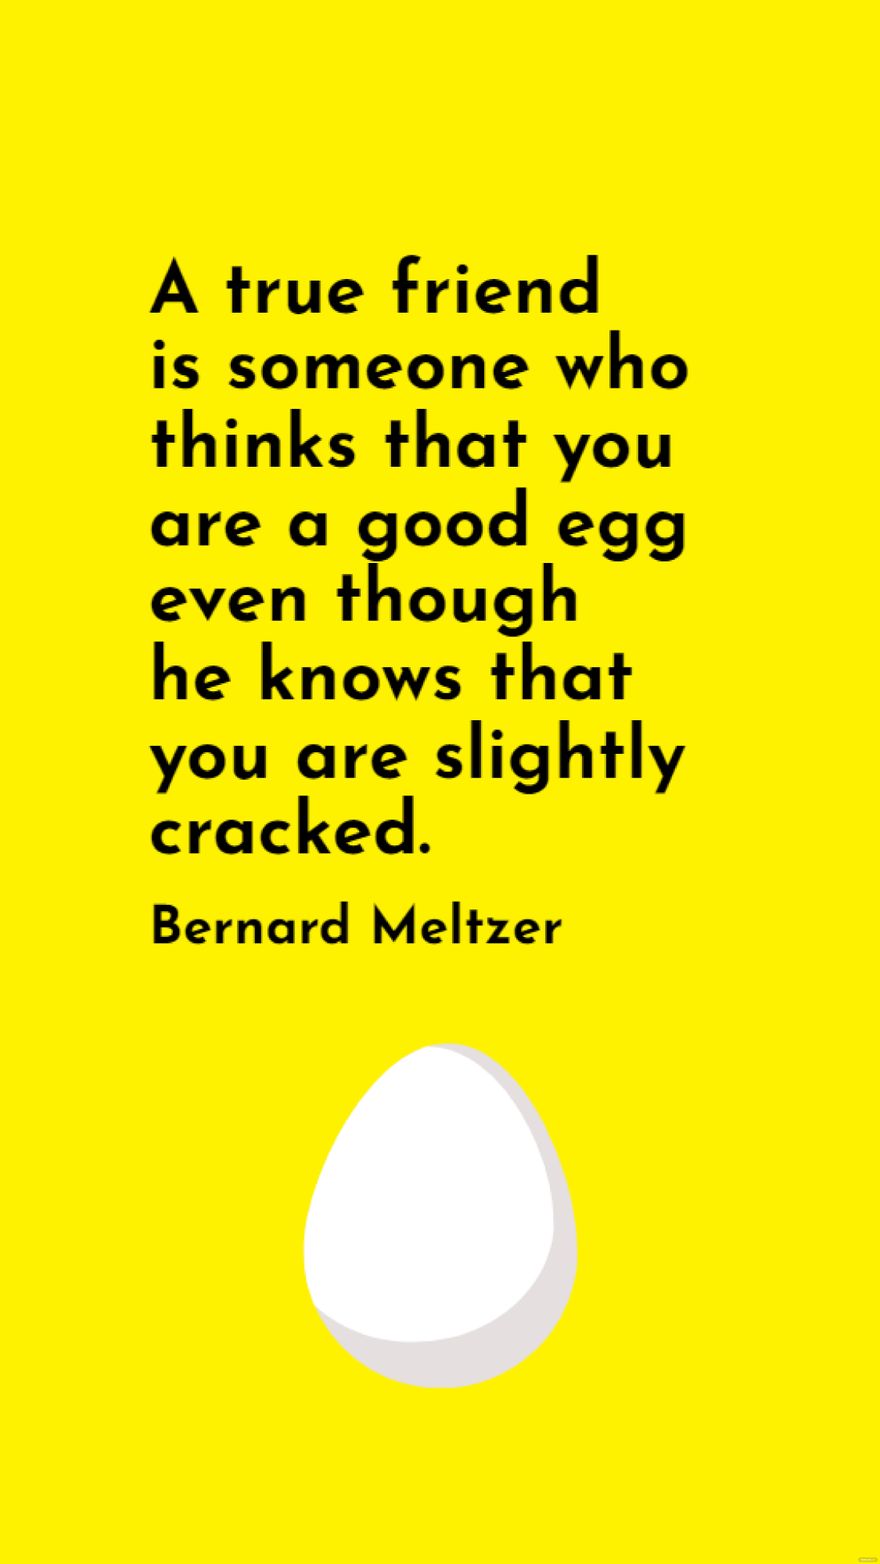 Bernard Meltzer - A true friend is someone who thinks that you are a good egg even though he knows that you are slightly cracked.